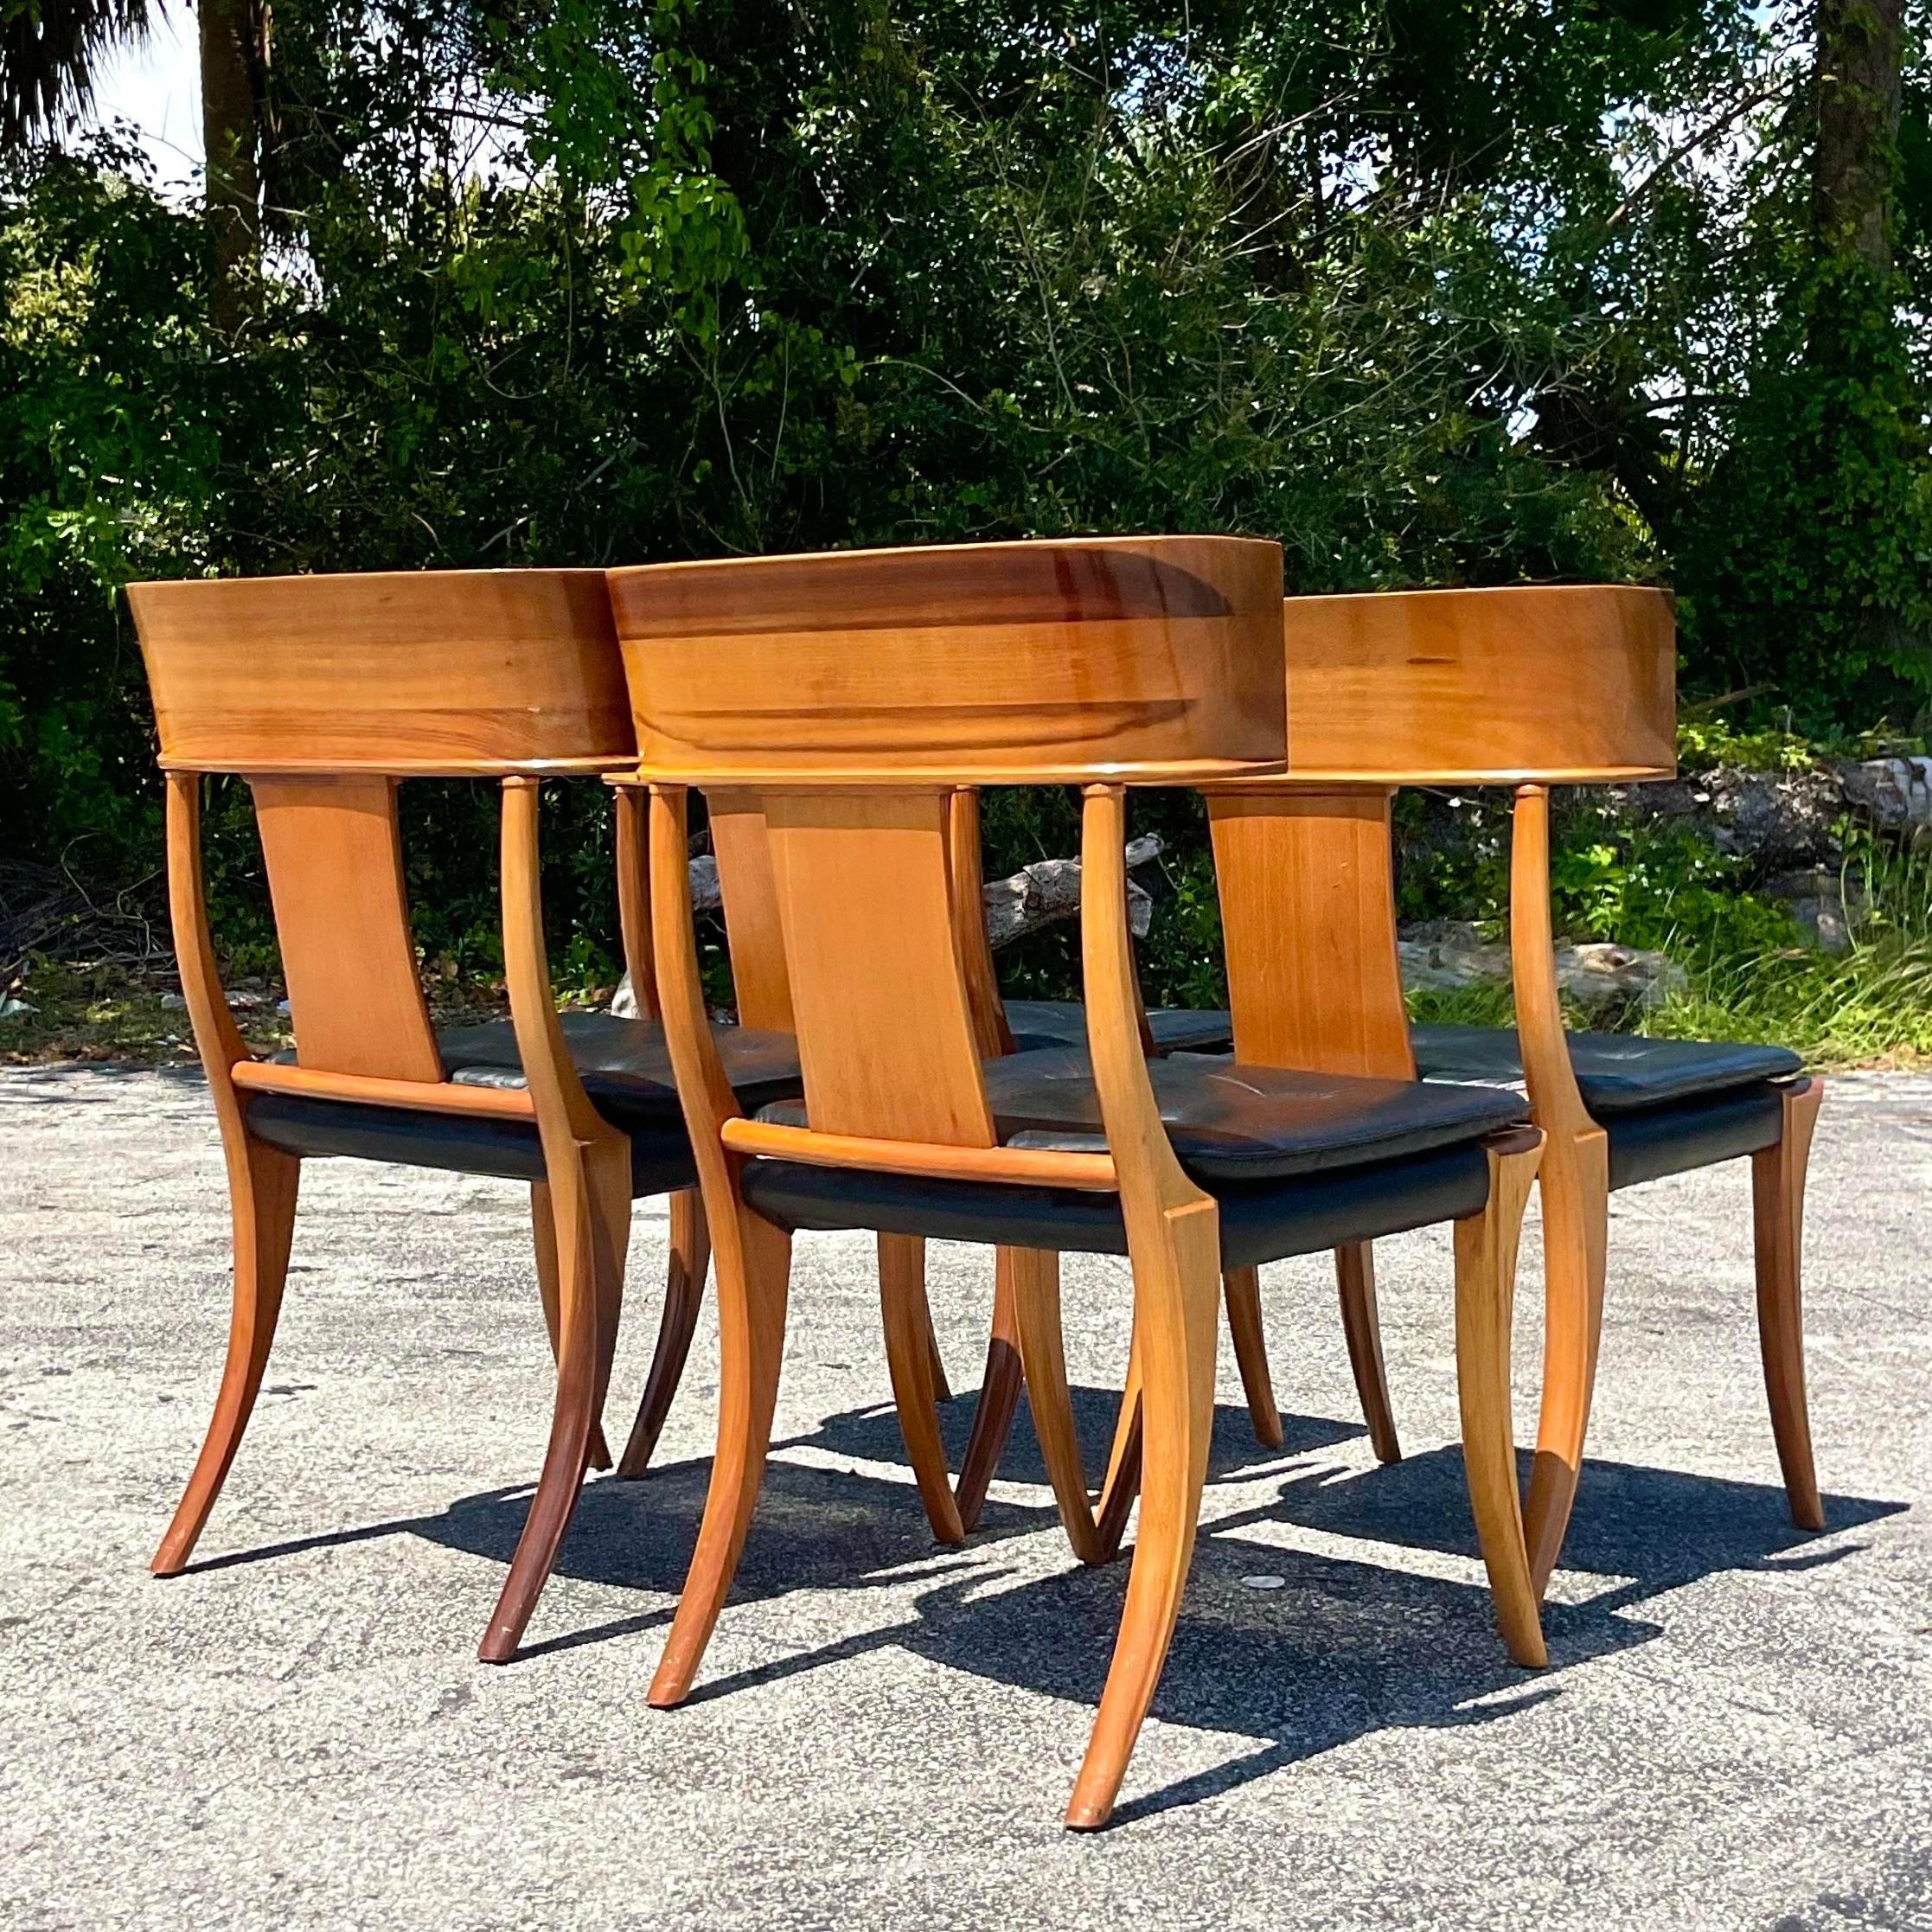 Vintage Neoclassical Klismos Dining Chairs After Kipp Stuart - Set of 4 For Sale 5